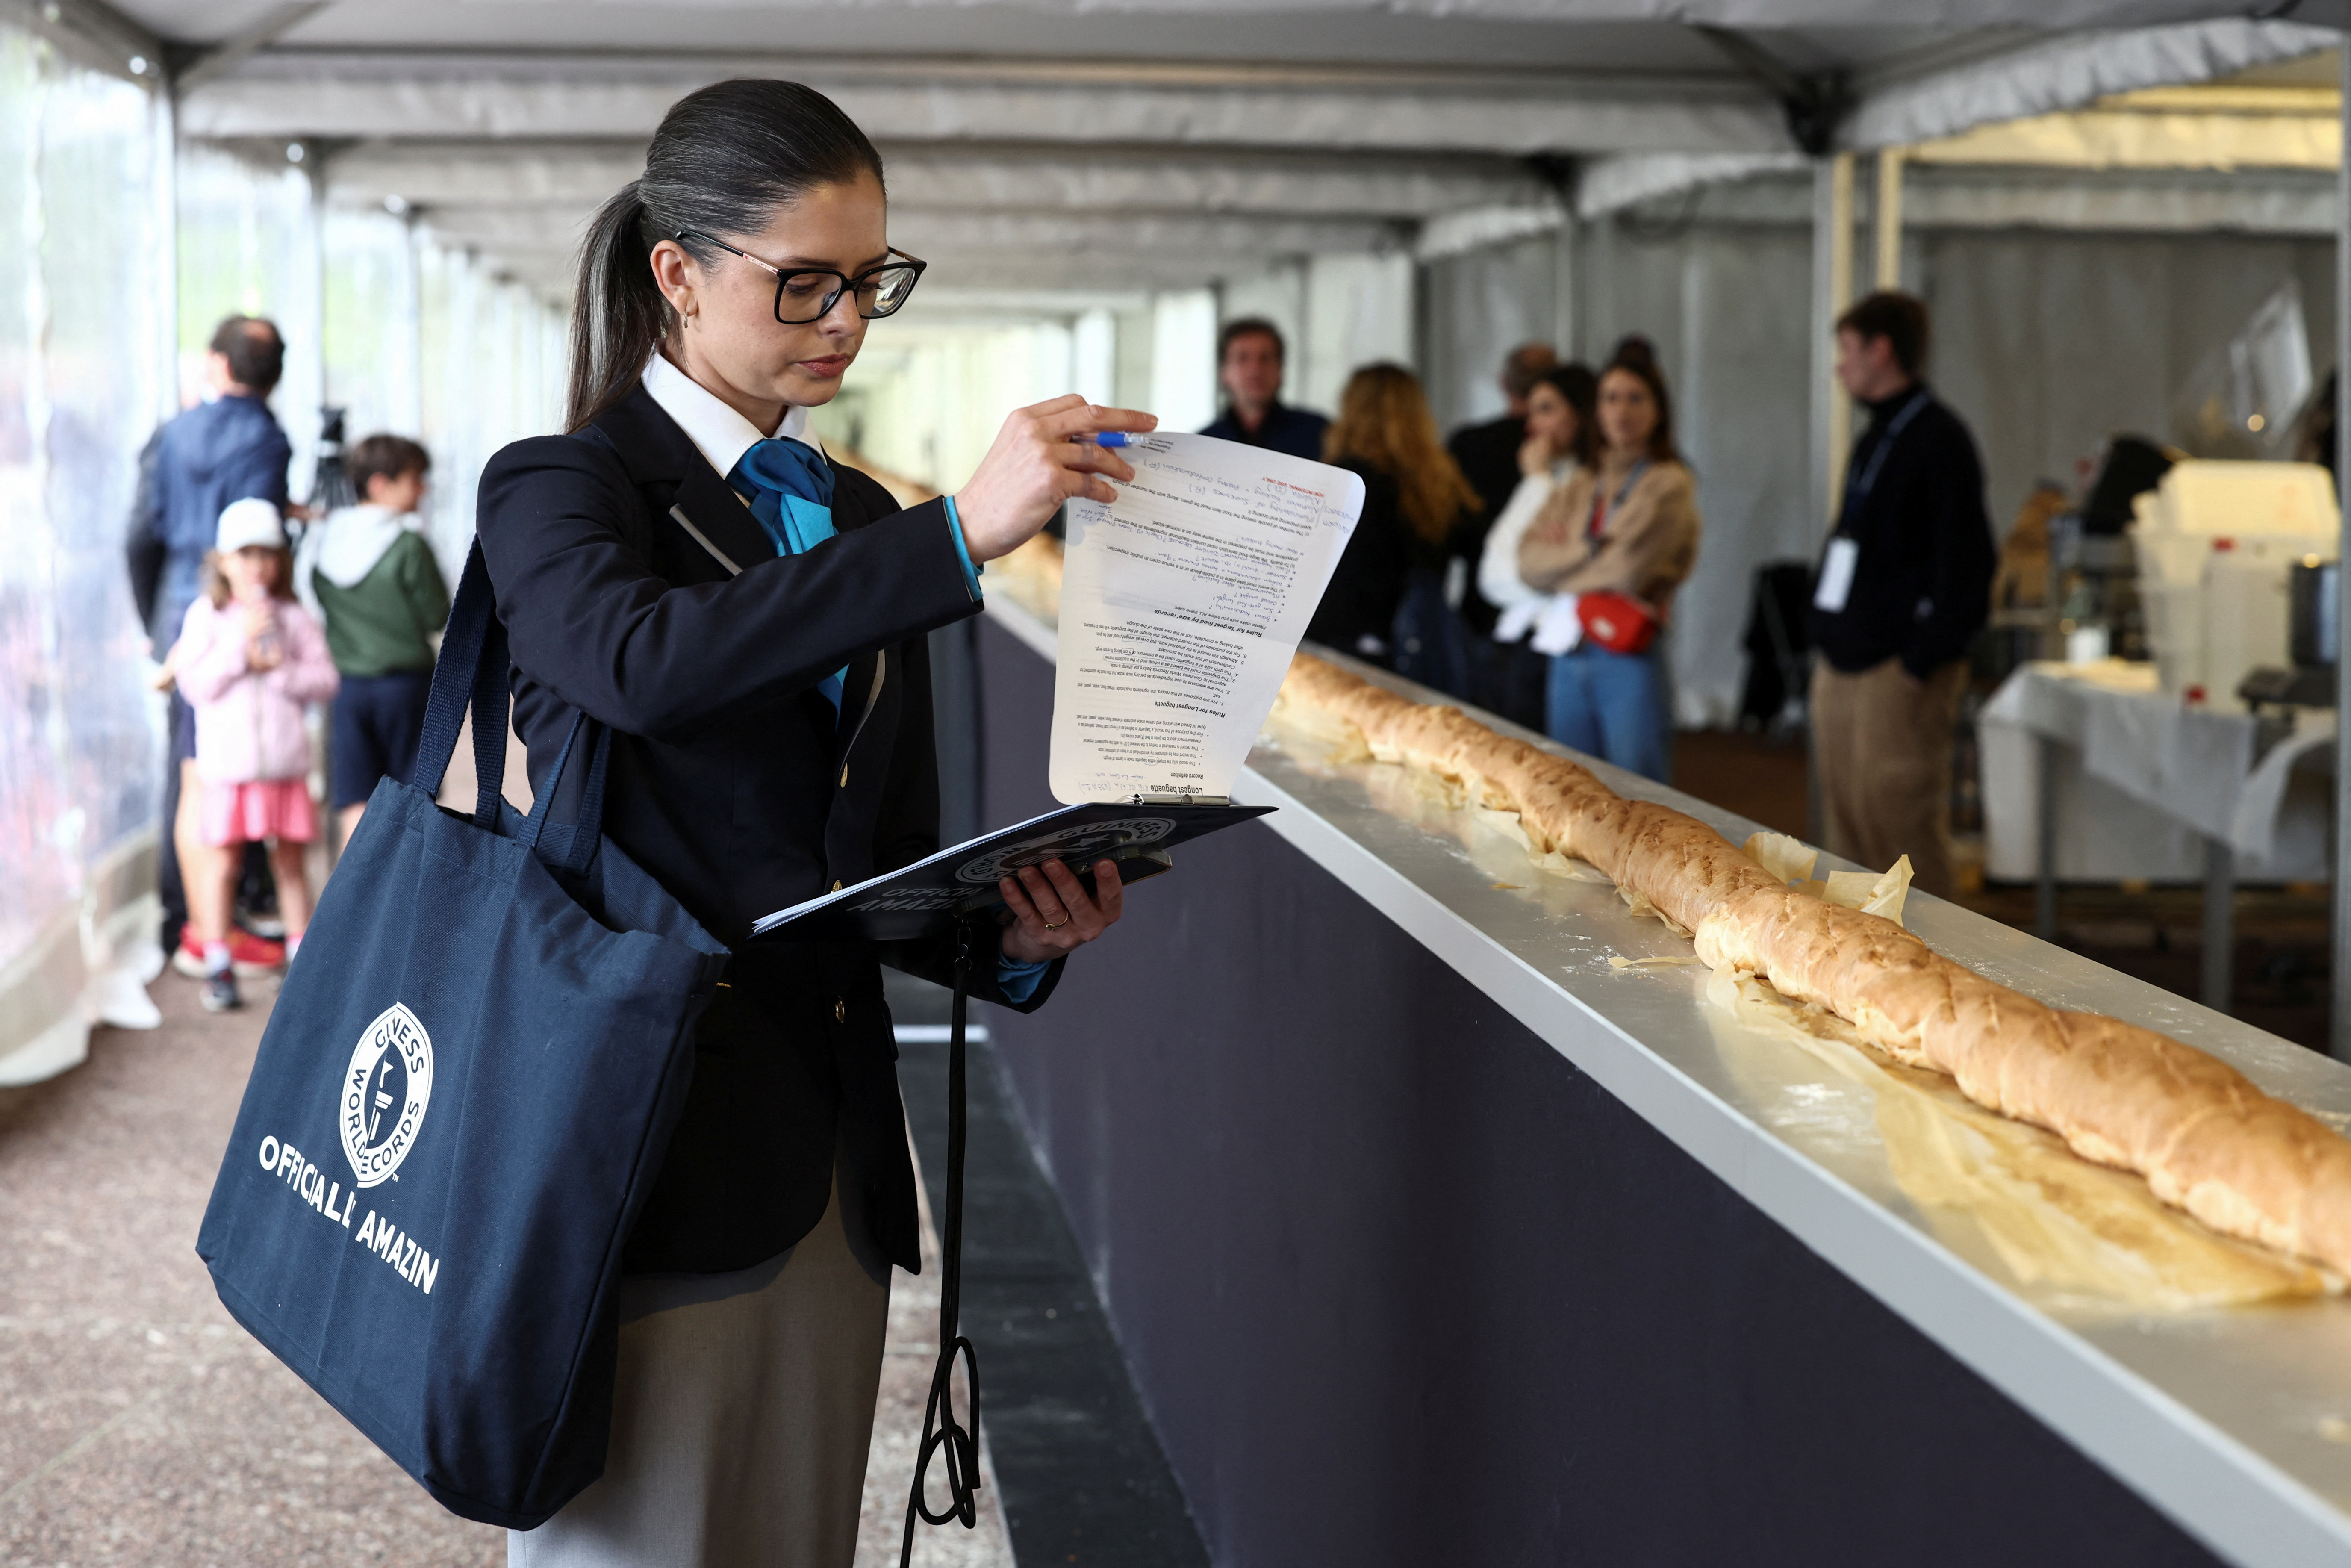 French bakers in record attempt for longest baguette